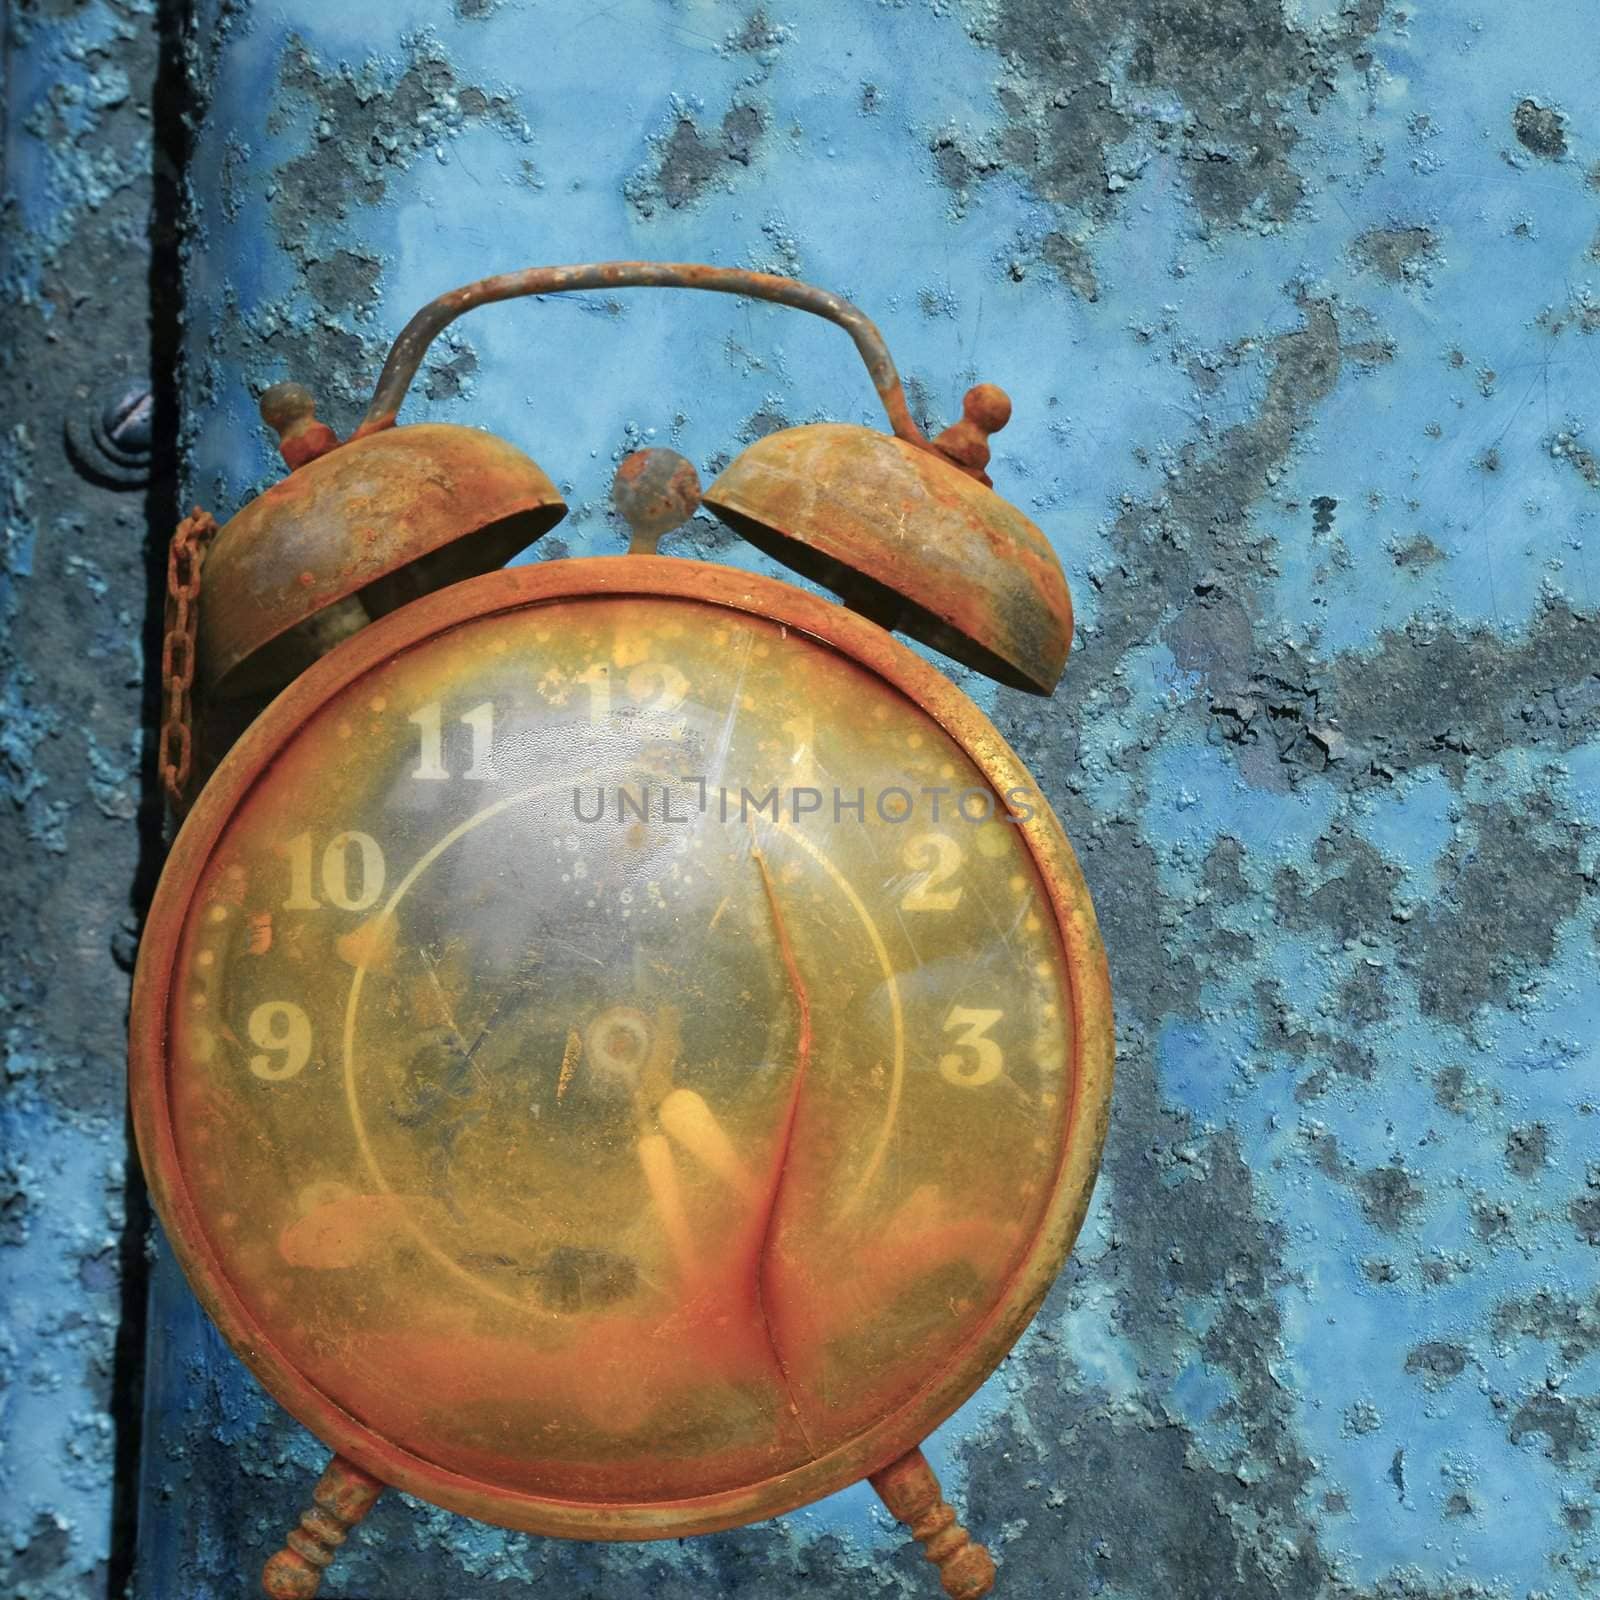 Old weathered alarm clock against rusty blue metal background.